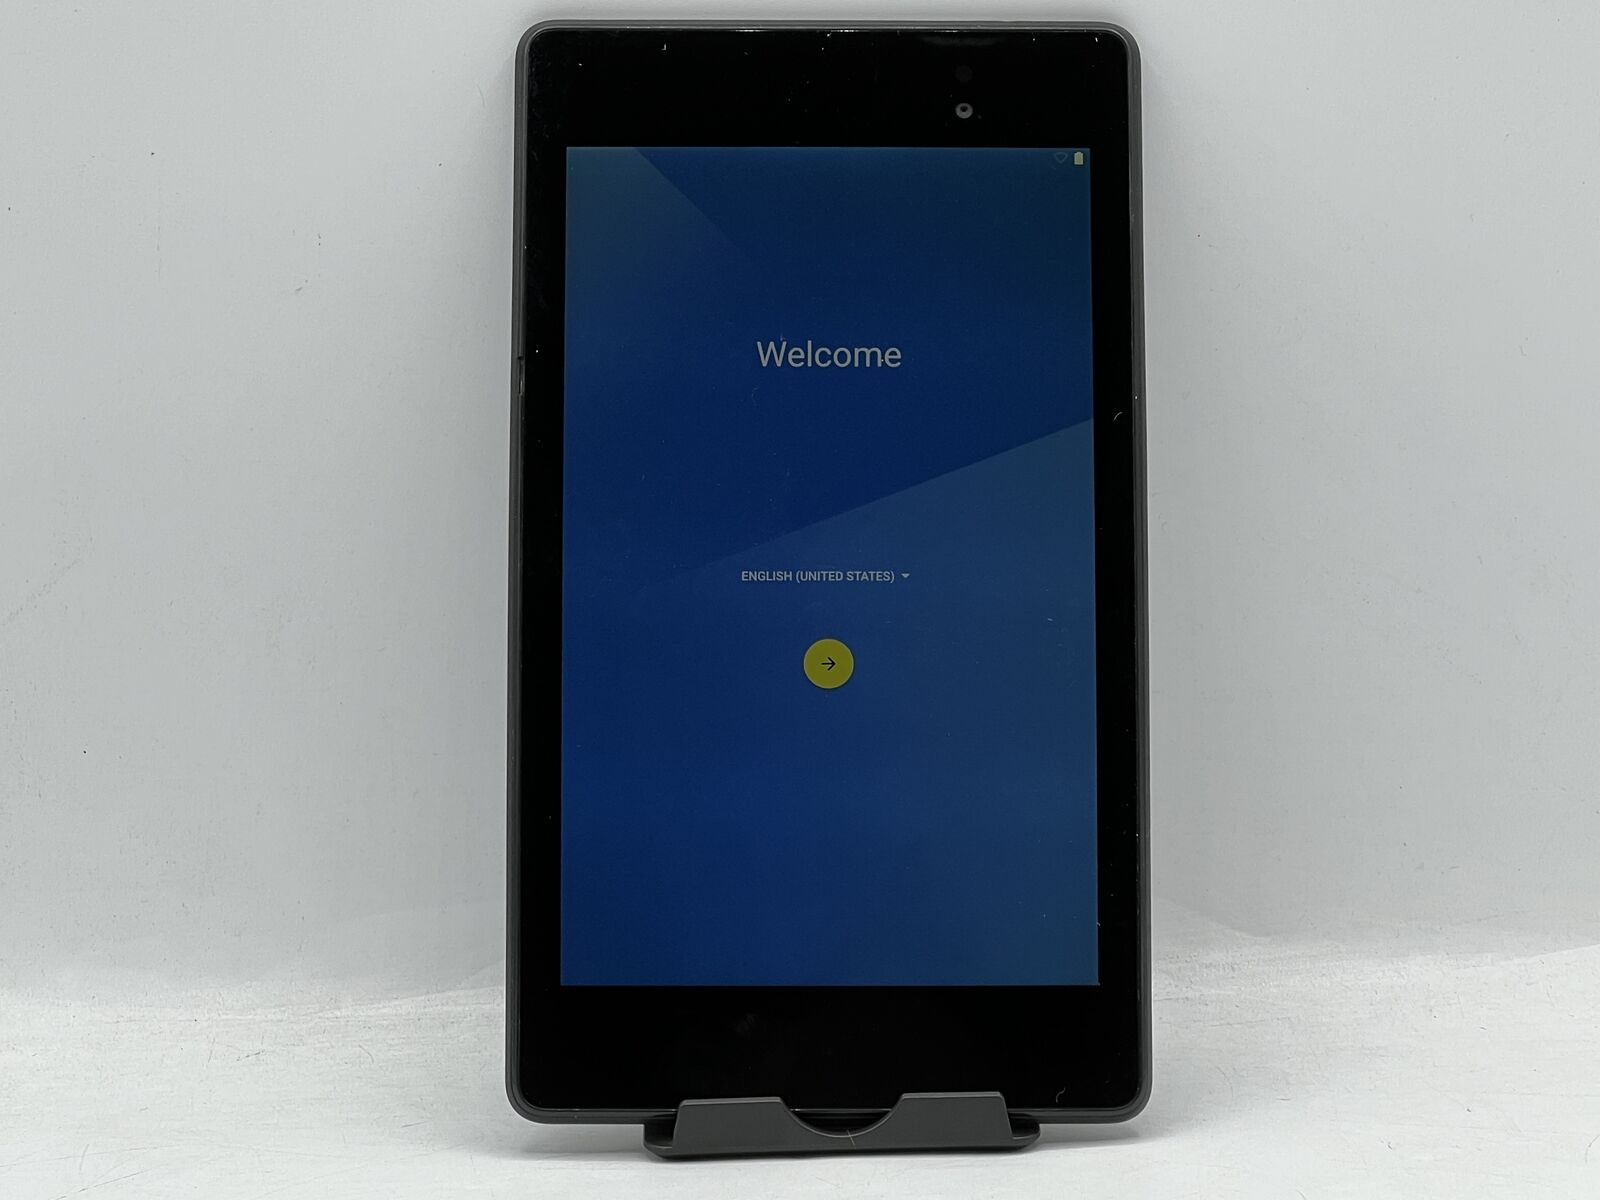 Asus Google Nexus 7 Android Tablet 7